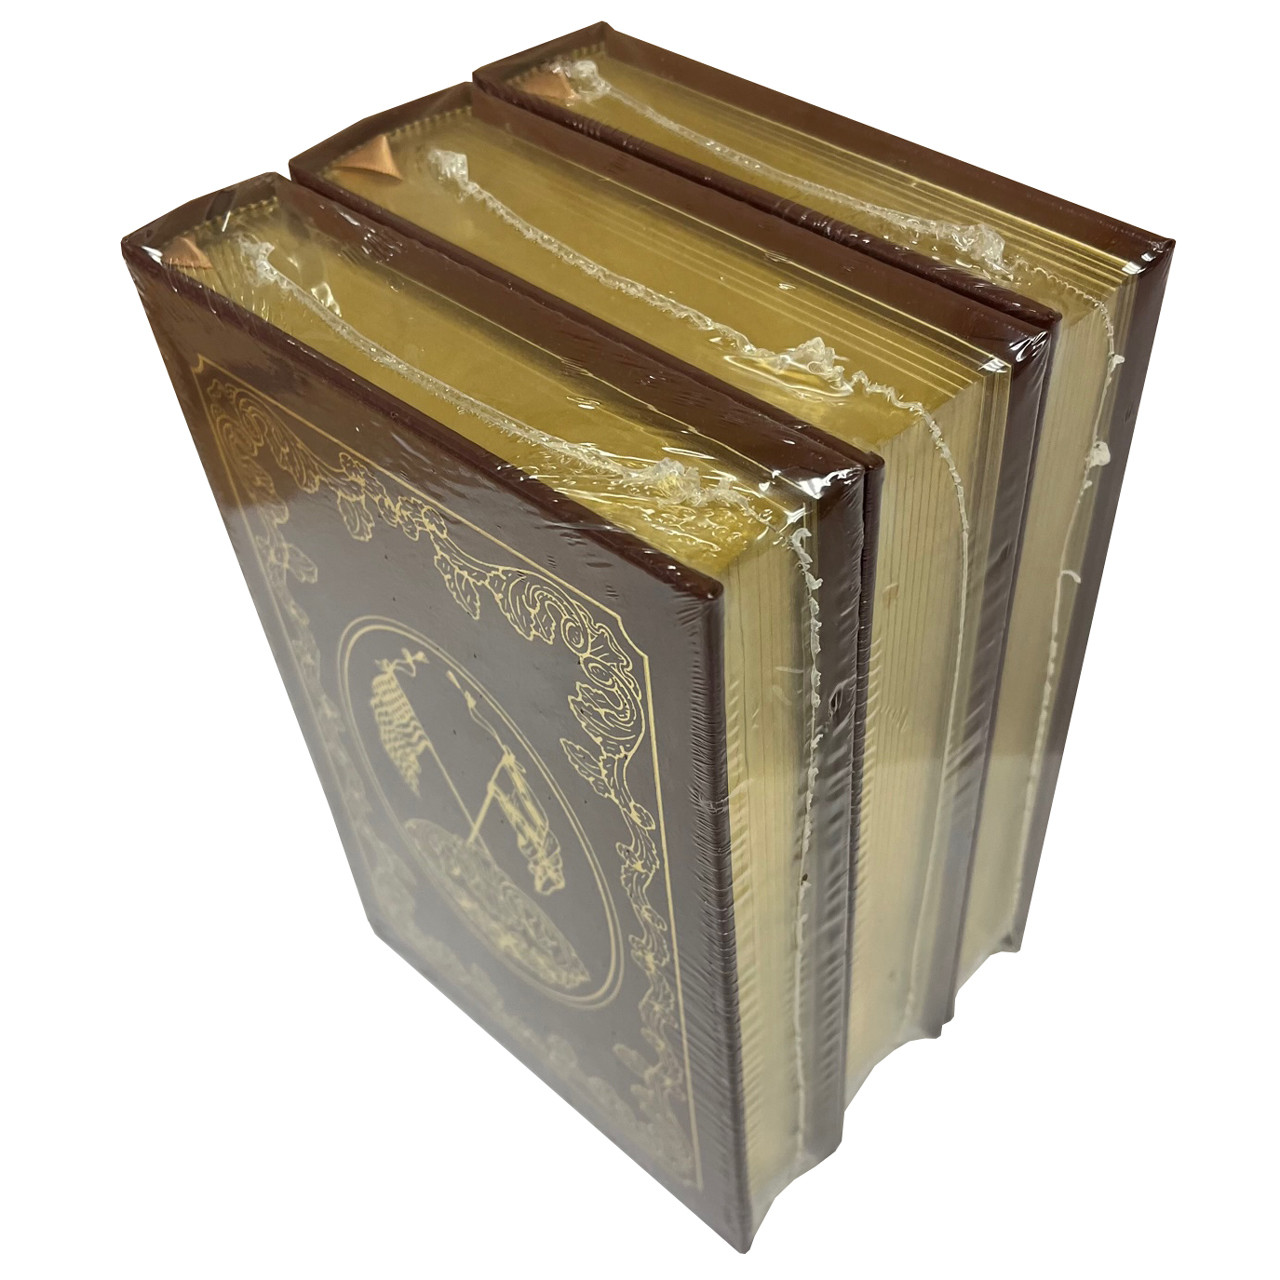 John Jakes "North & South Trilogy" Signed Limited Edition, Leather Bound 3-Vol Complete Matching Set w/COA [Sealed]